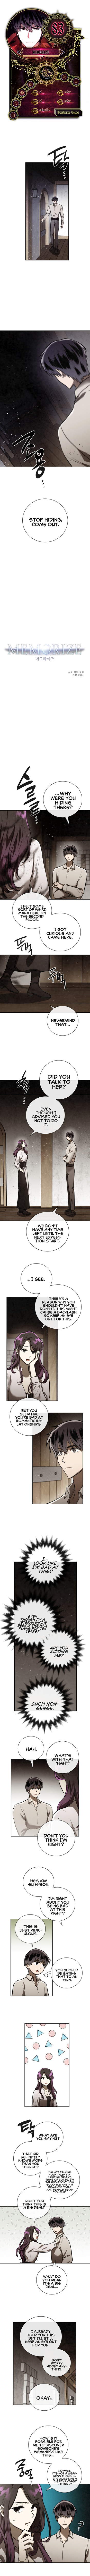 Memorize - Chapter 14309 - Image 1